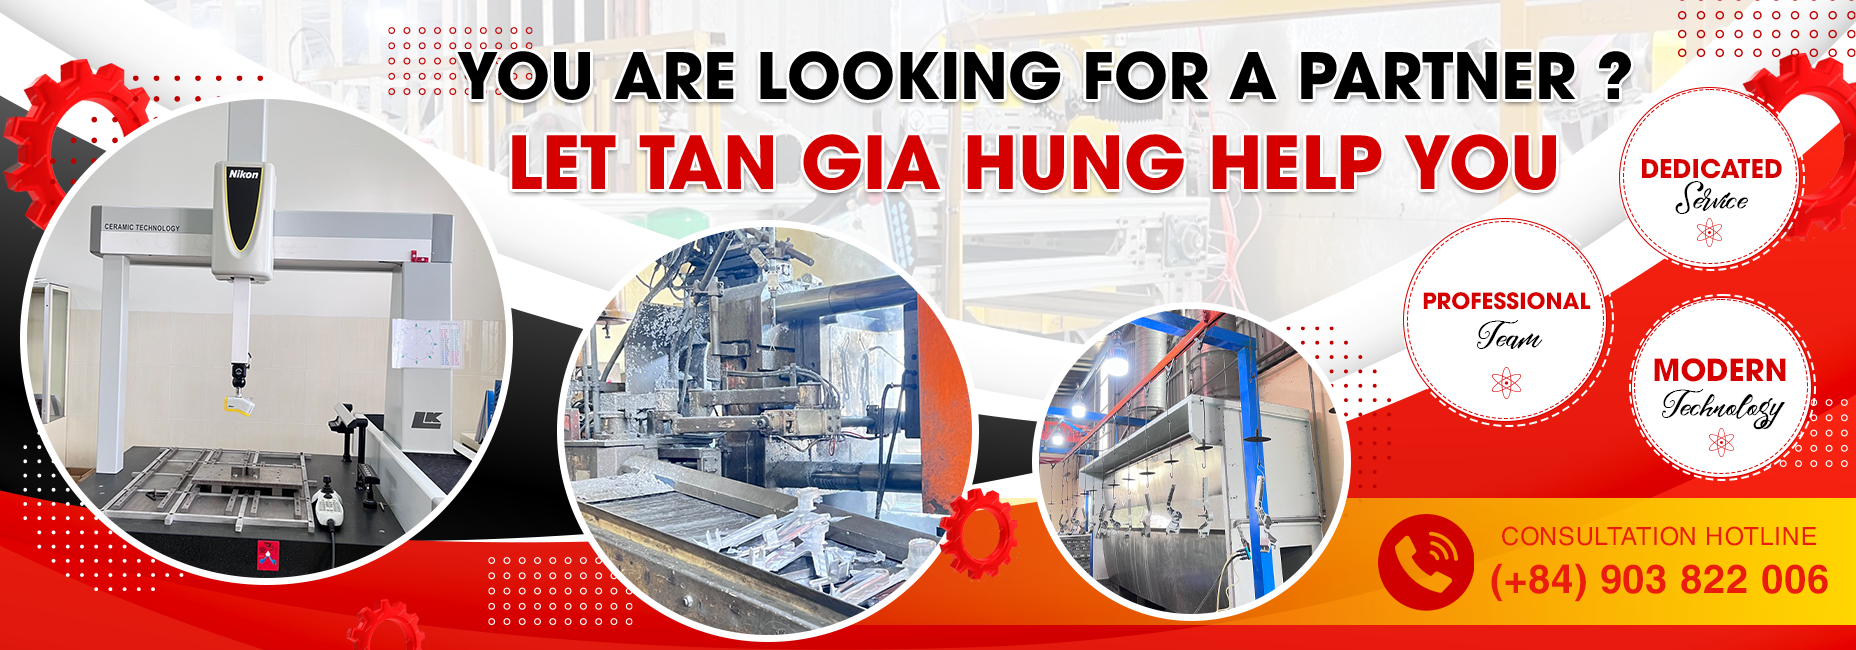 Tan Gia Hung One Member Company Limited